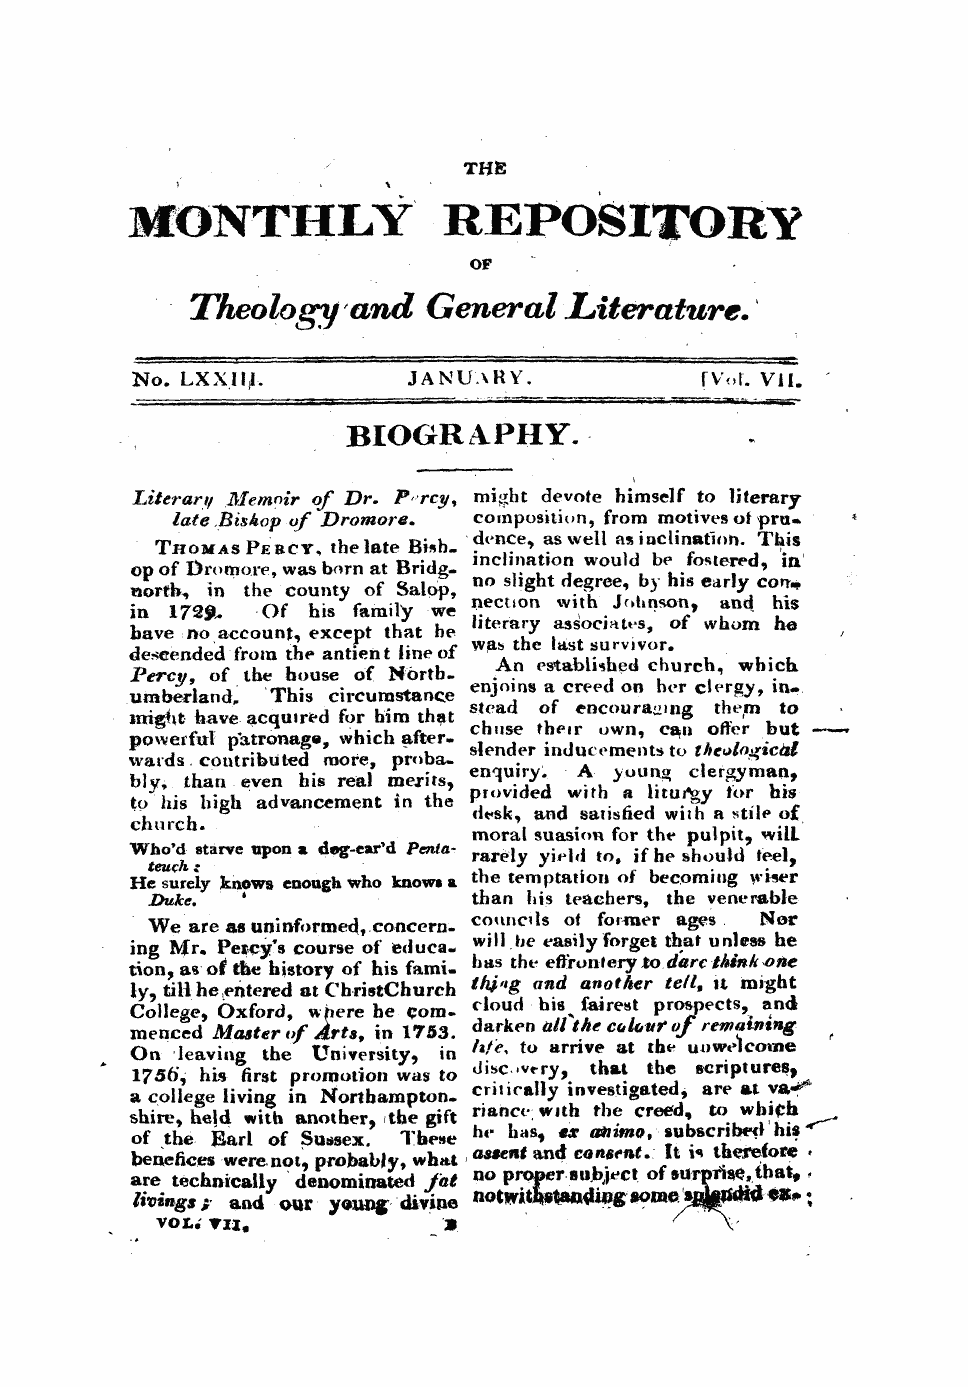 Monthly Repository (1806-1838) and Unitarian Chronicle (1832-1833): F Y, 1st edition - Biography.